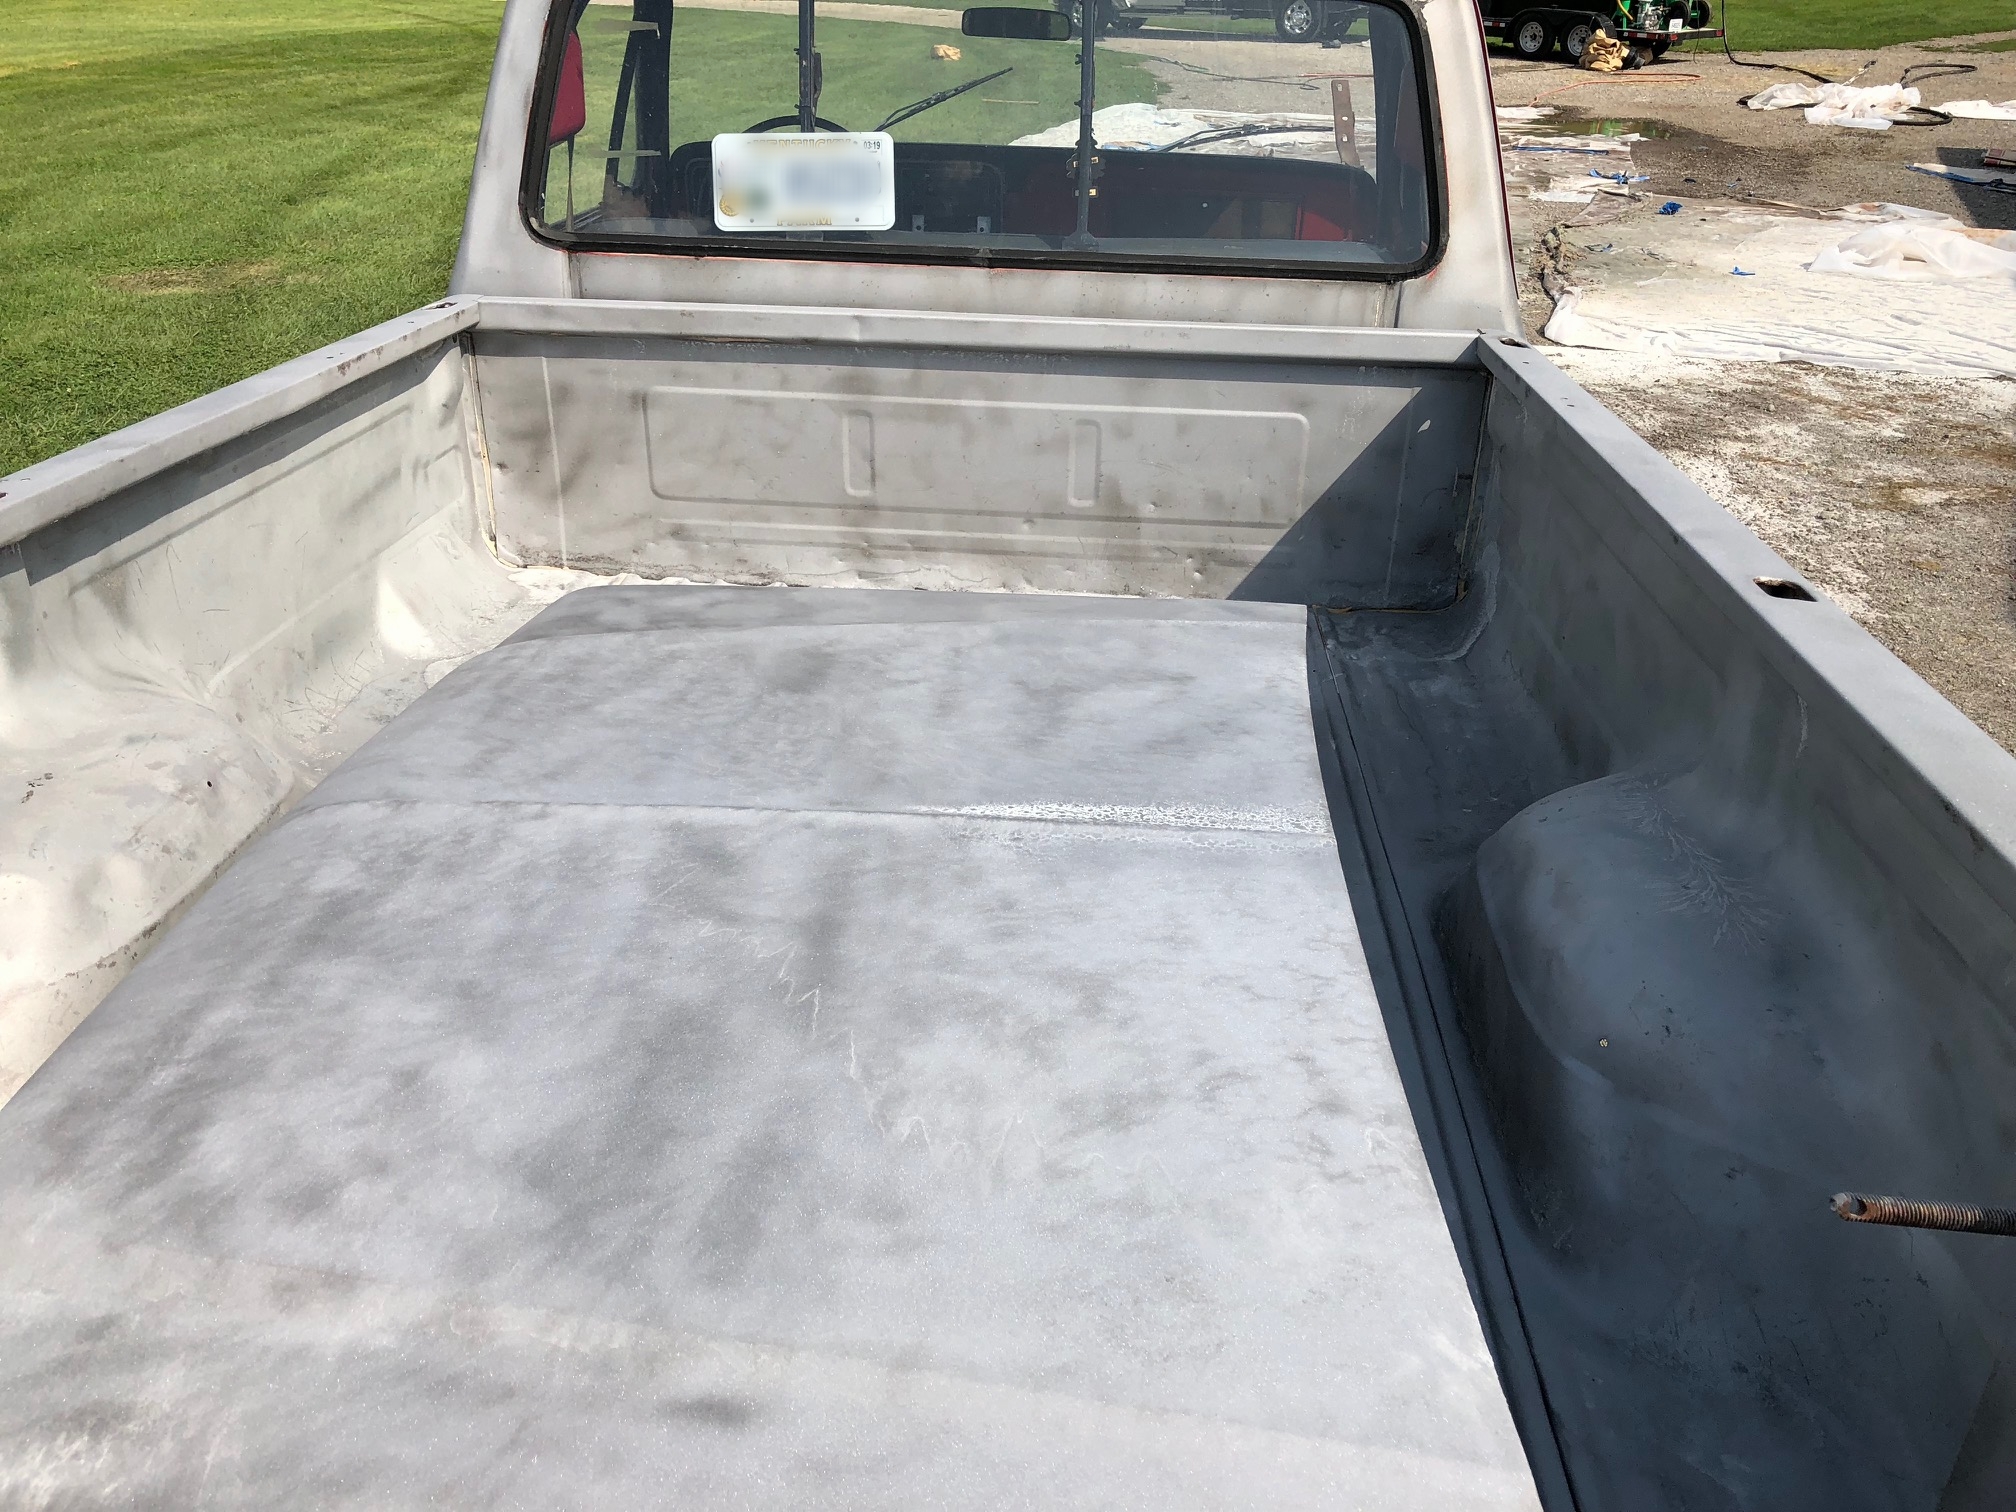 70's Ford Pickup Truck Bed After